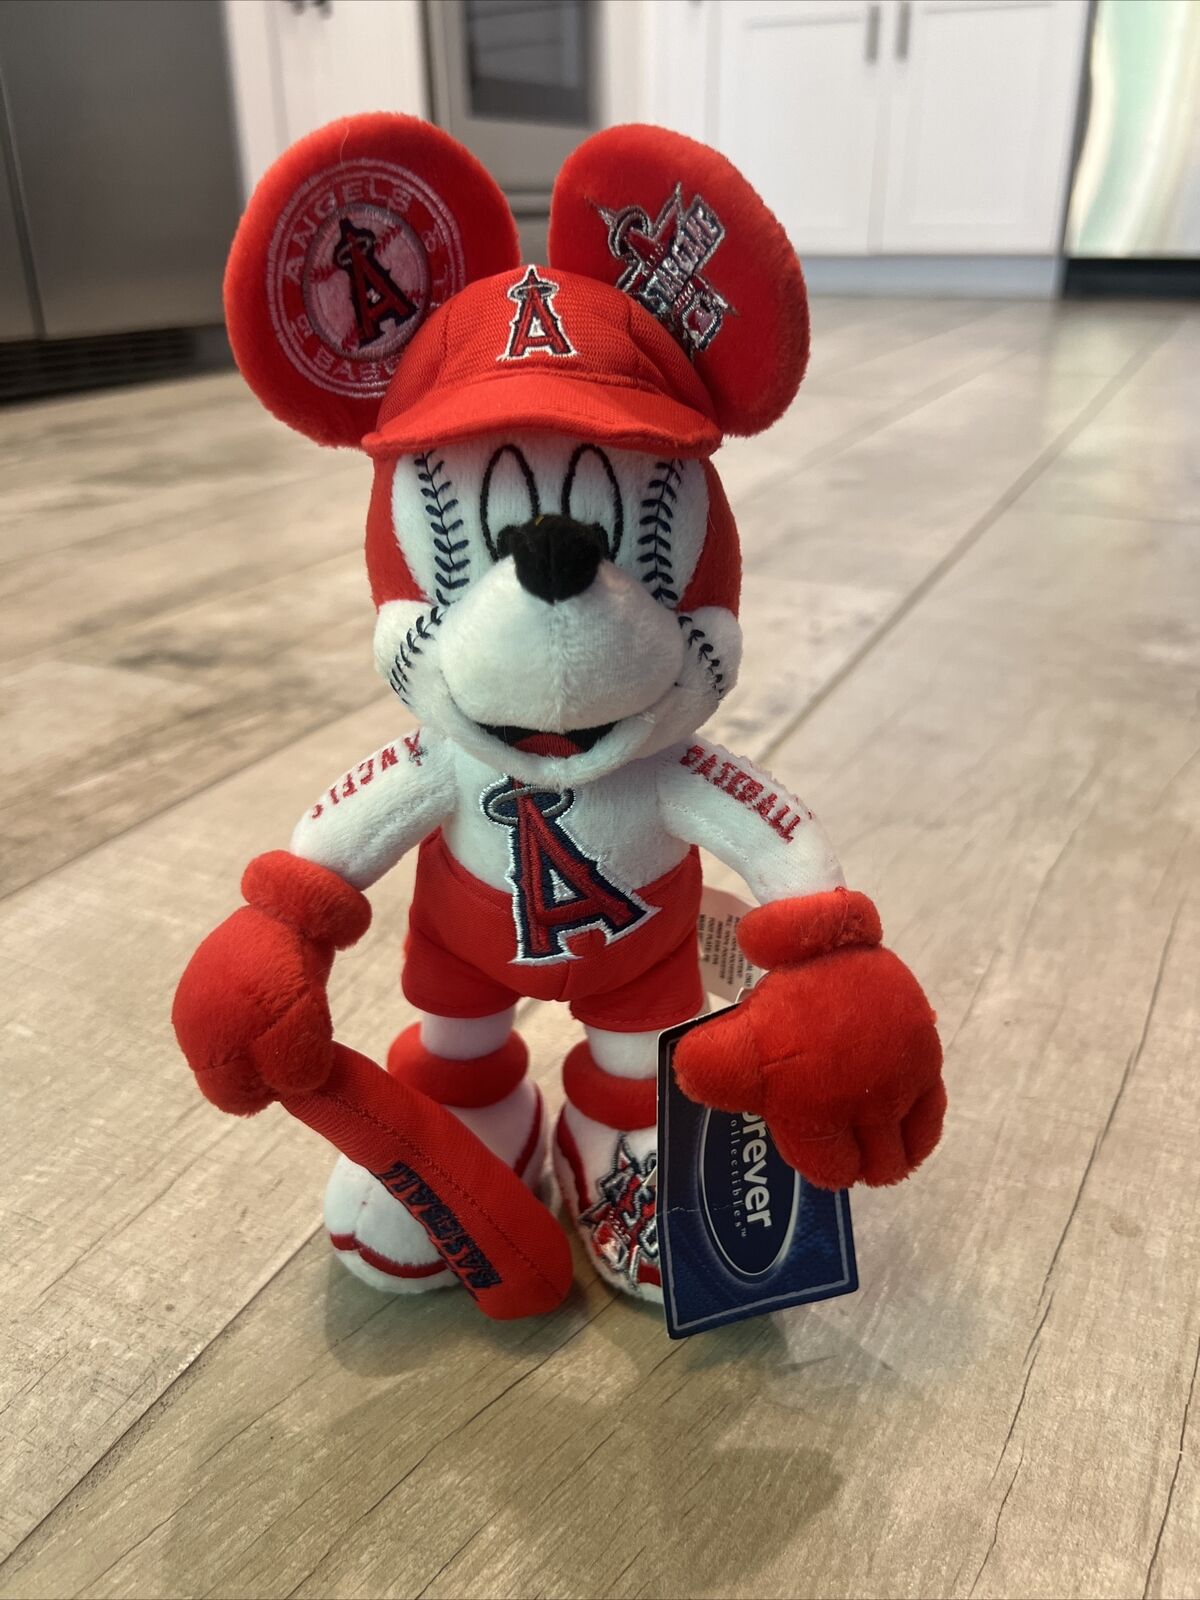 NWT Disney Forever Plush Angels BASEBALL MICKEY w/Red And White Uniform ASG 2010